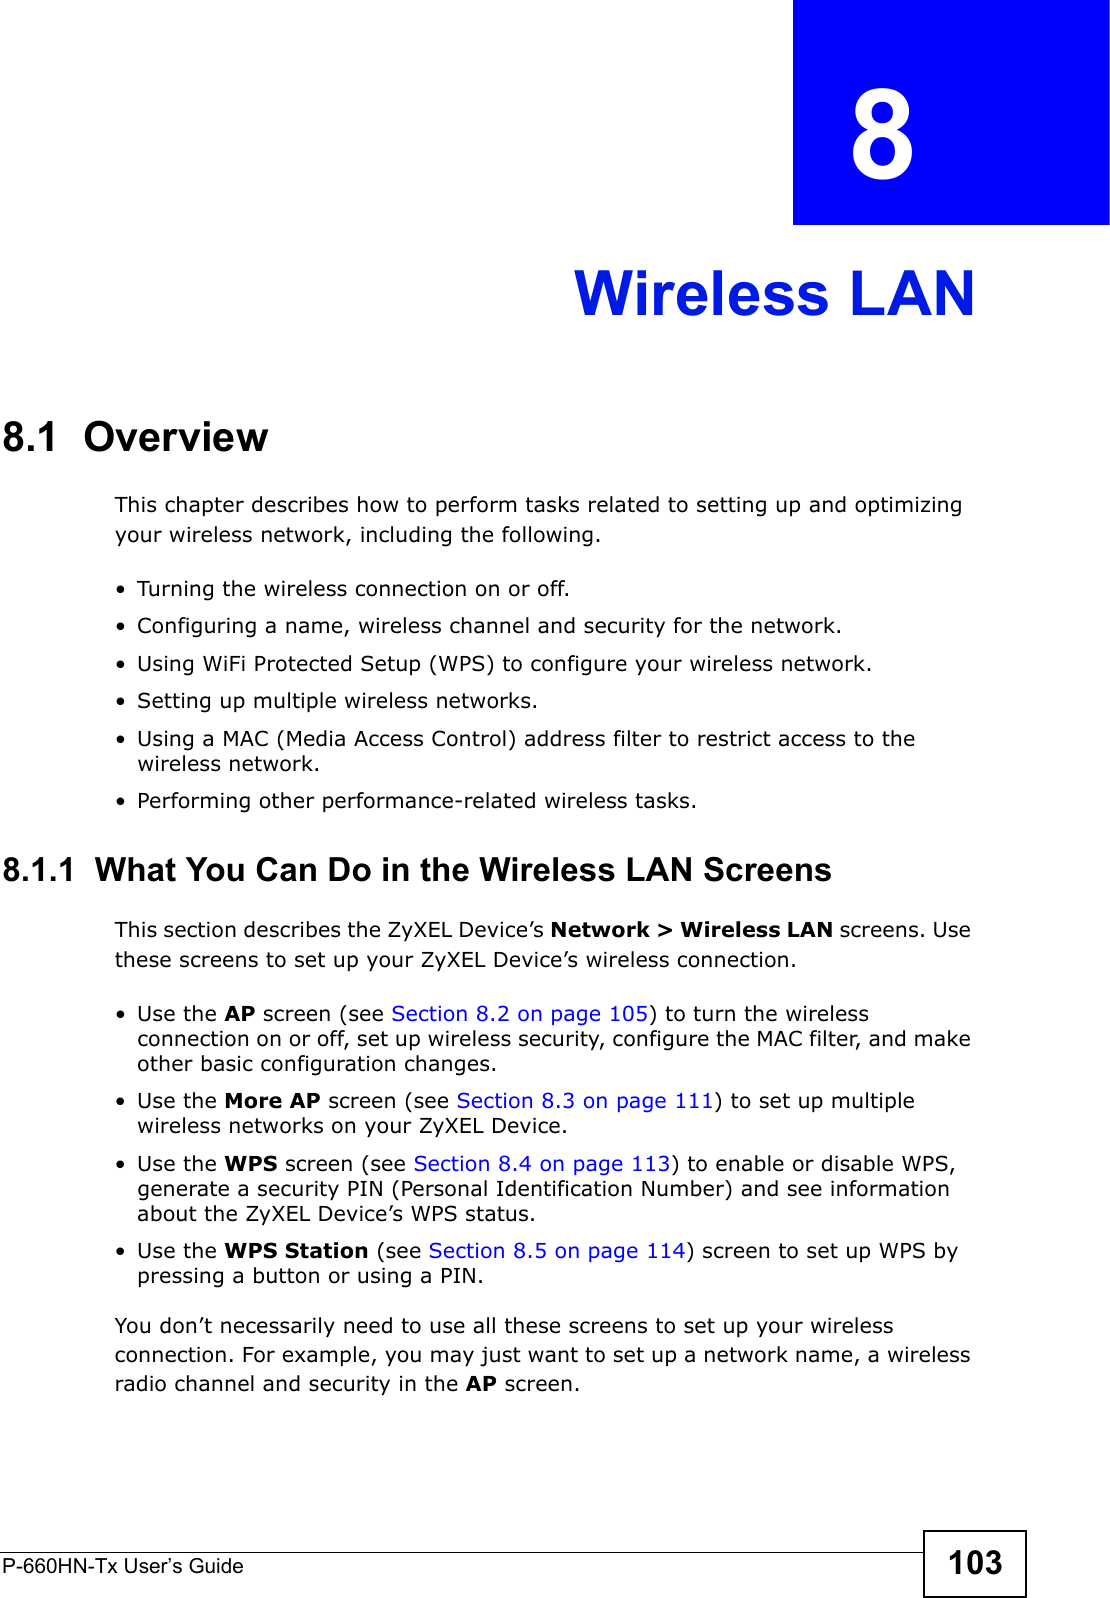 P-660HN-Tx User’s Guide 103CHAPTER  8 Wireless LAN8.1  Overview This chapter describes how to perform tasks related to setting up and optimizing your wireless network, including the following.• Turning the wireless connection on or off.• Configuring a name, wireless channel and security for the network.• Using WiFi Protected Setup (WPS) to configure your wireless network.• Setting up multiple wireless networks.• Using a MAC (Media Access Control) address filter to restrict access to the wireless network.• Performing other performance-related wireless tasks.8.1.1  What You Can Do in the Wireless LAN ScreensThis section describes the ZyXEL Device’s Network &gt; Wireless LAN screens. Use these screens to set up your ZyXEL Device’s wireless connection.•Use the AP screen (see Section 8.2 on page 105) to turn the wireless connection on or off, set up wireless security, configure the MAC filter, and make other basic configuration changes.•Use the More AP screen (see Section 8.3 on page 111) to set up multiple wireless networks on your ZyXEL Device.•Use the WPS screen (see Section 8.4 on page 113) to enable or disable WPS, generate a security PIN (Personal Identification Number) and see information about the ZyXEL Device’s WPS status.•Use the WPS Station (see Section 8.5 on page 114) screen to set up WPS by pressing a button or using a PIN.You don’t necessarily need to use all these screens to set up your wireless connection. For example, you may just want to set up a network name, a wireless radio channel and security in the AP screen.